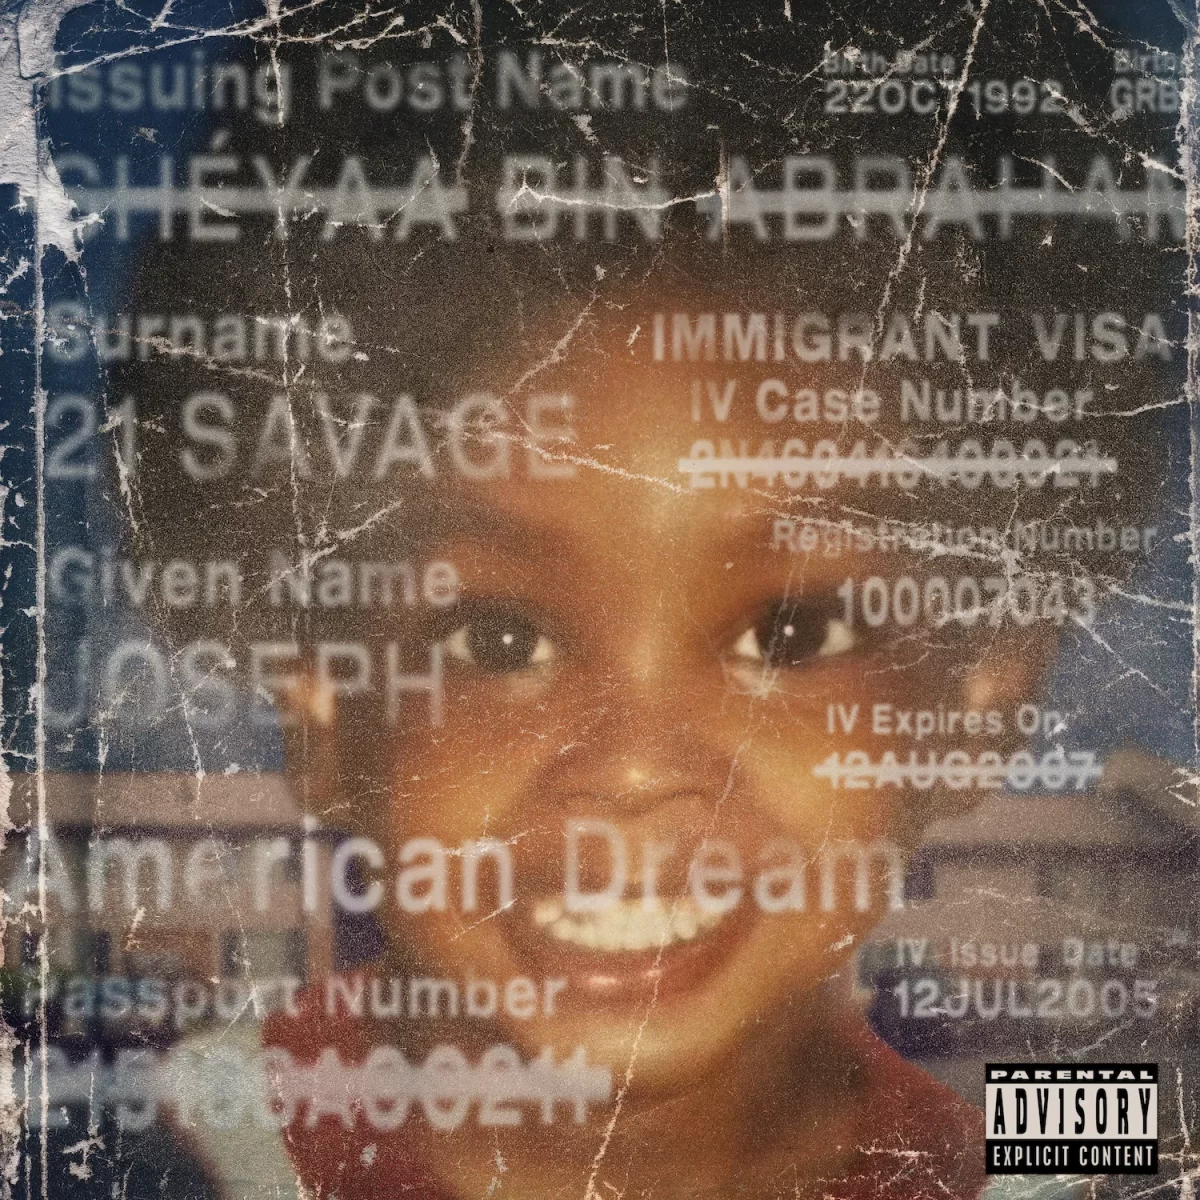 21 Savages New Album “American Dream” Review